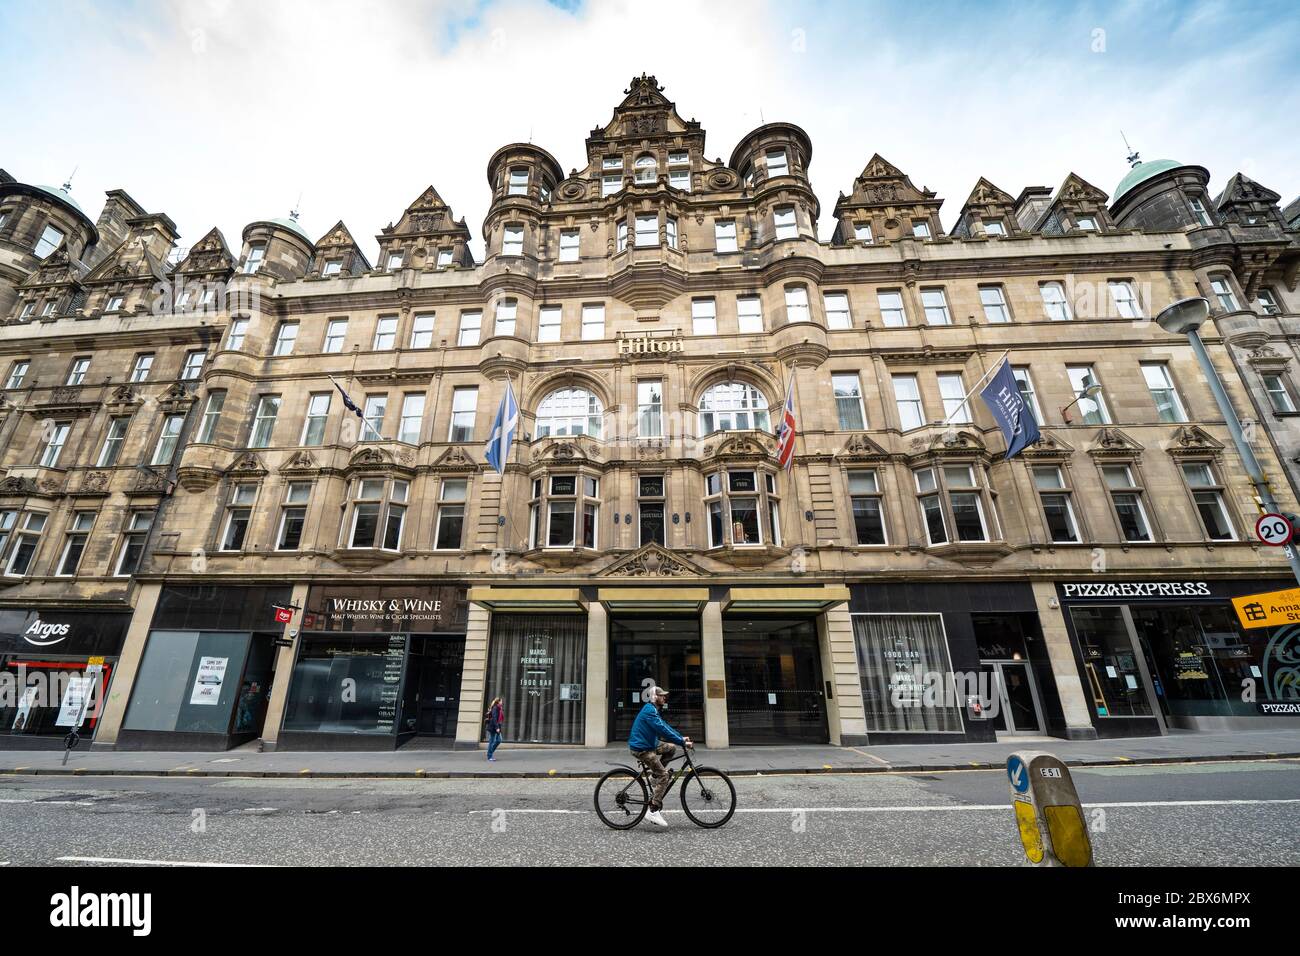 Hilton Carlton Hotel in Edinburgh where possible first cases of coronavirus in Scotland were detected at a Nike conference held there, Scotland, UK Stock Photo